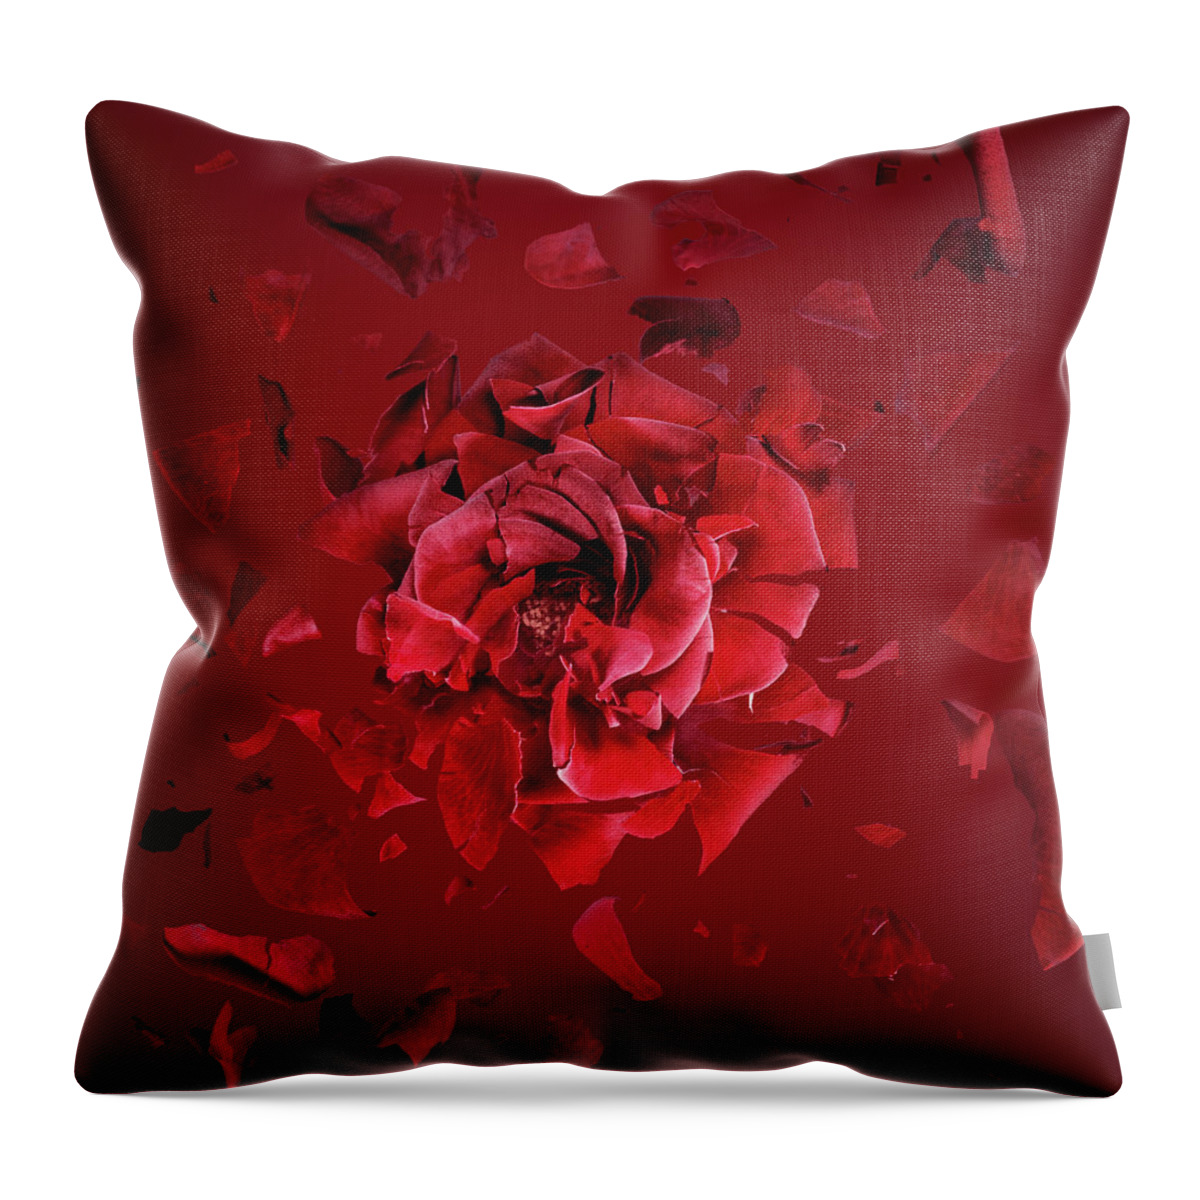 Mid-air Throw Pillow featuring the photograph Exploding Red Rose, Fragments Flying by Jonathan Knowles